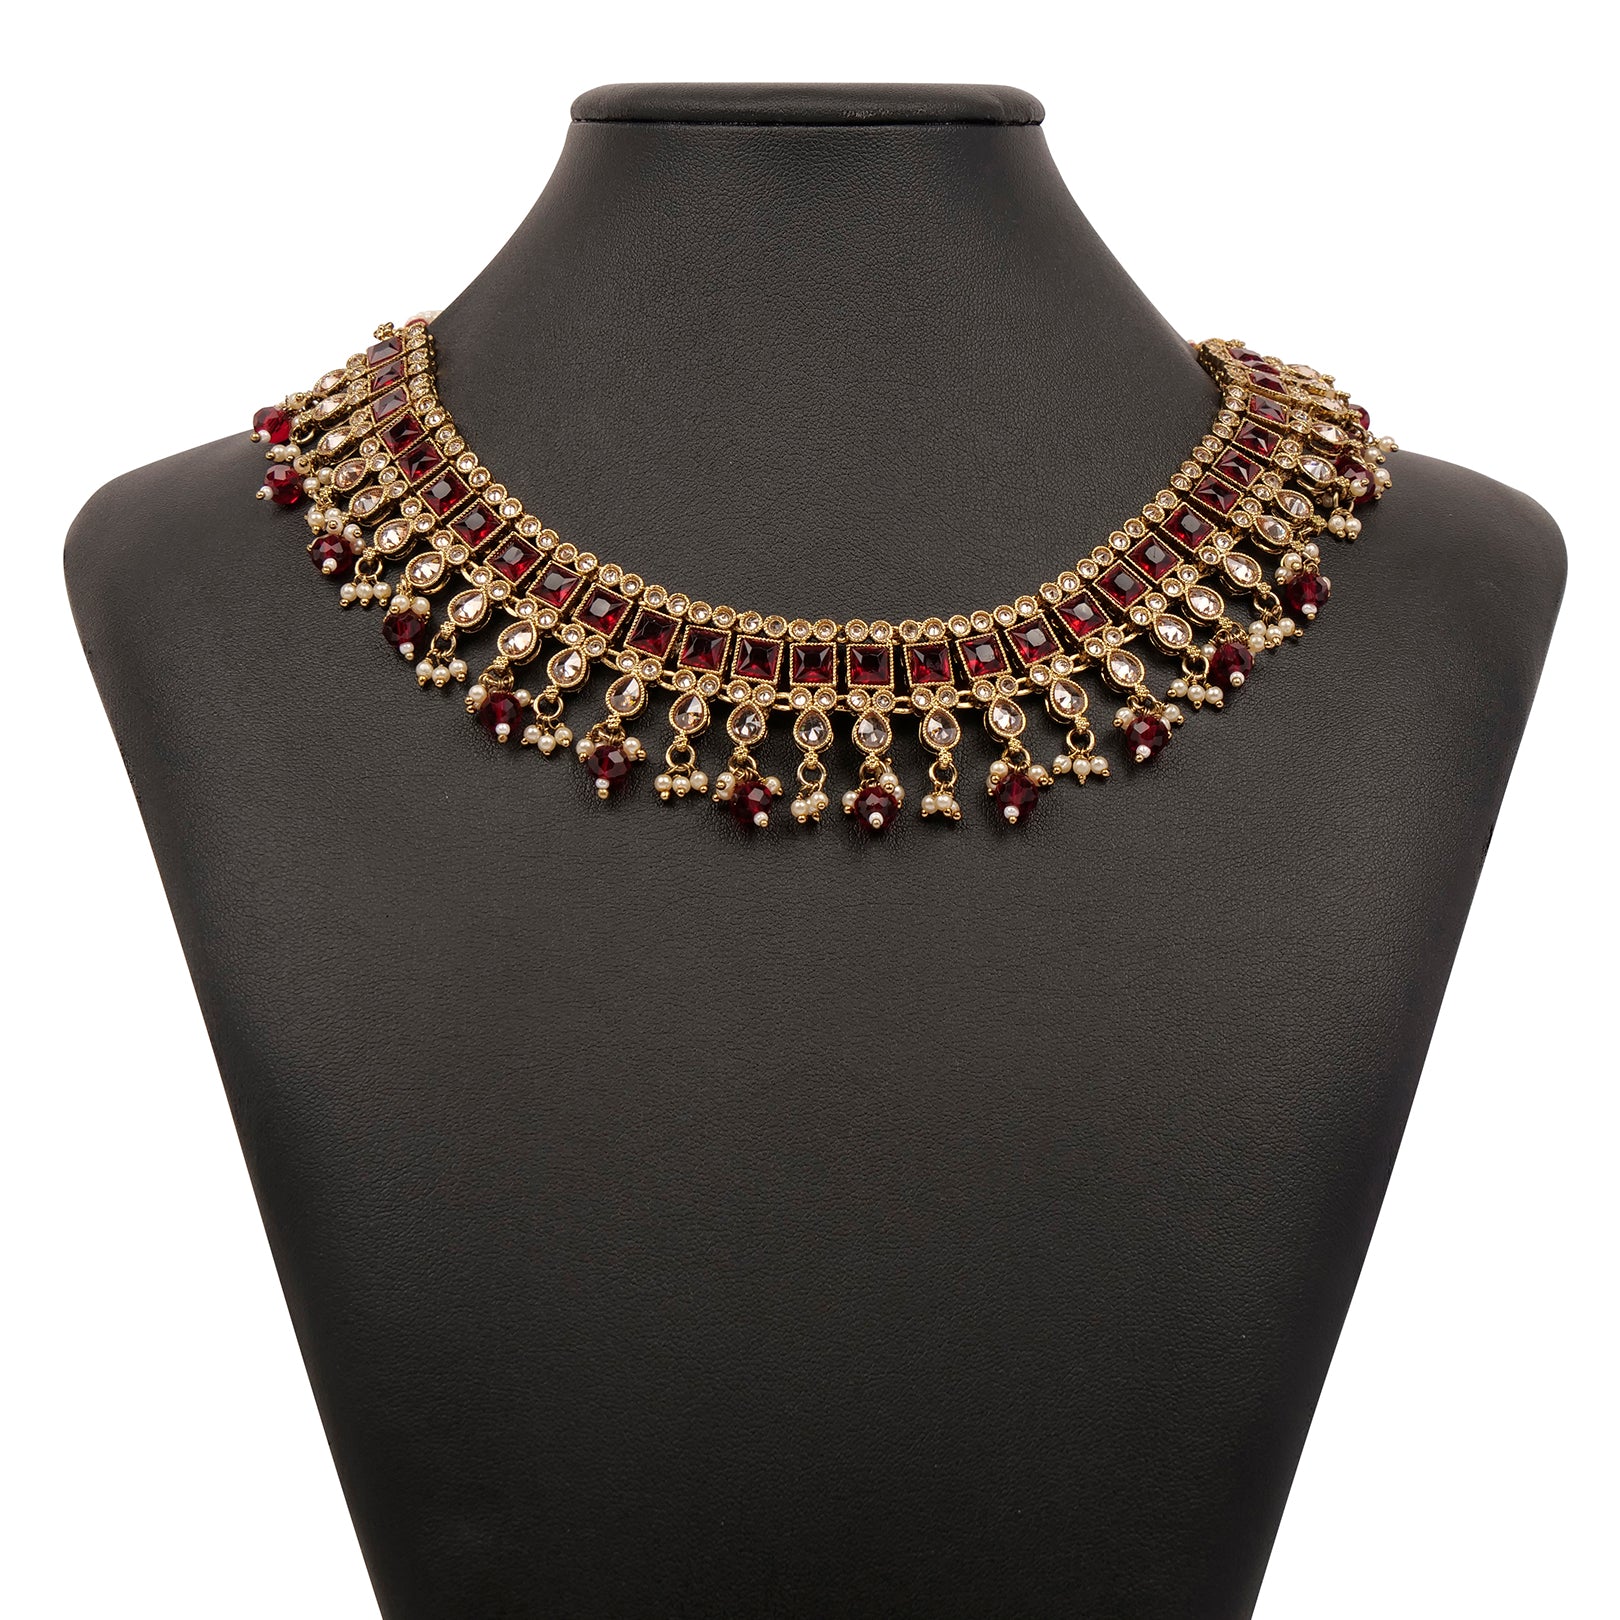 Sana Necklace Set in Maroon and Antique Gold 